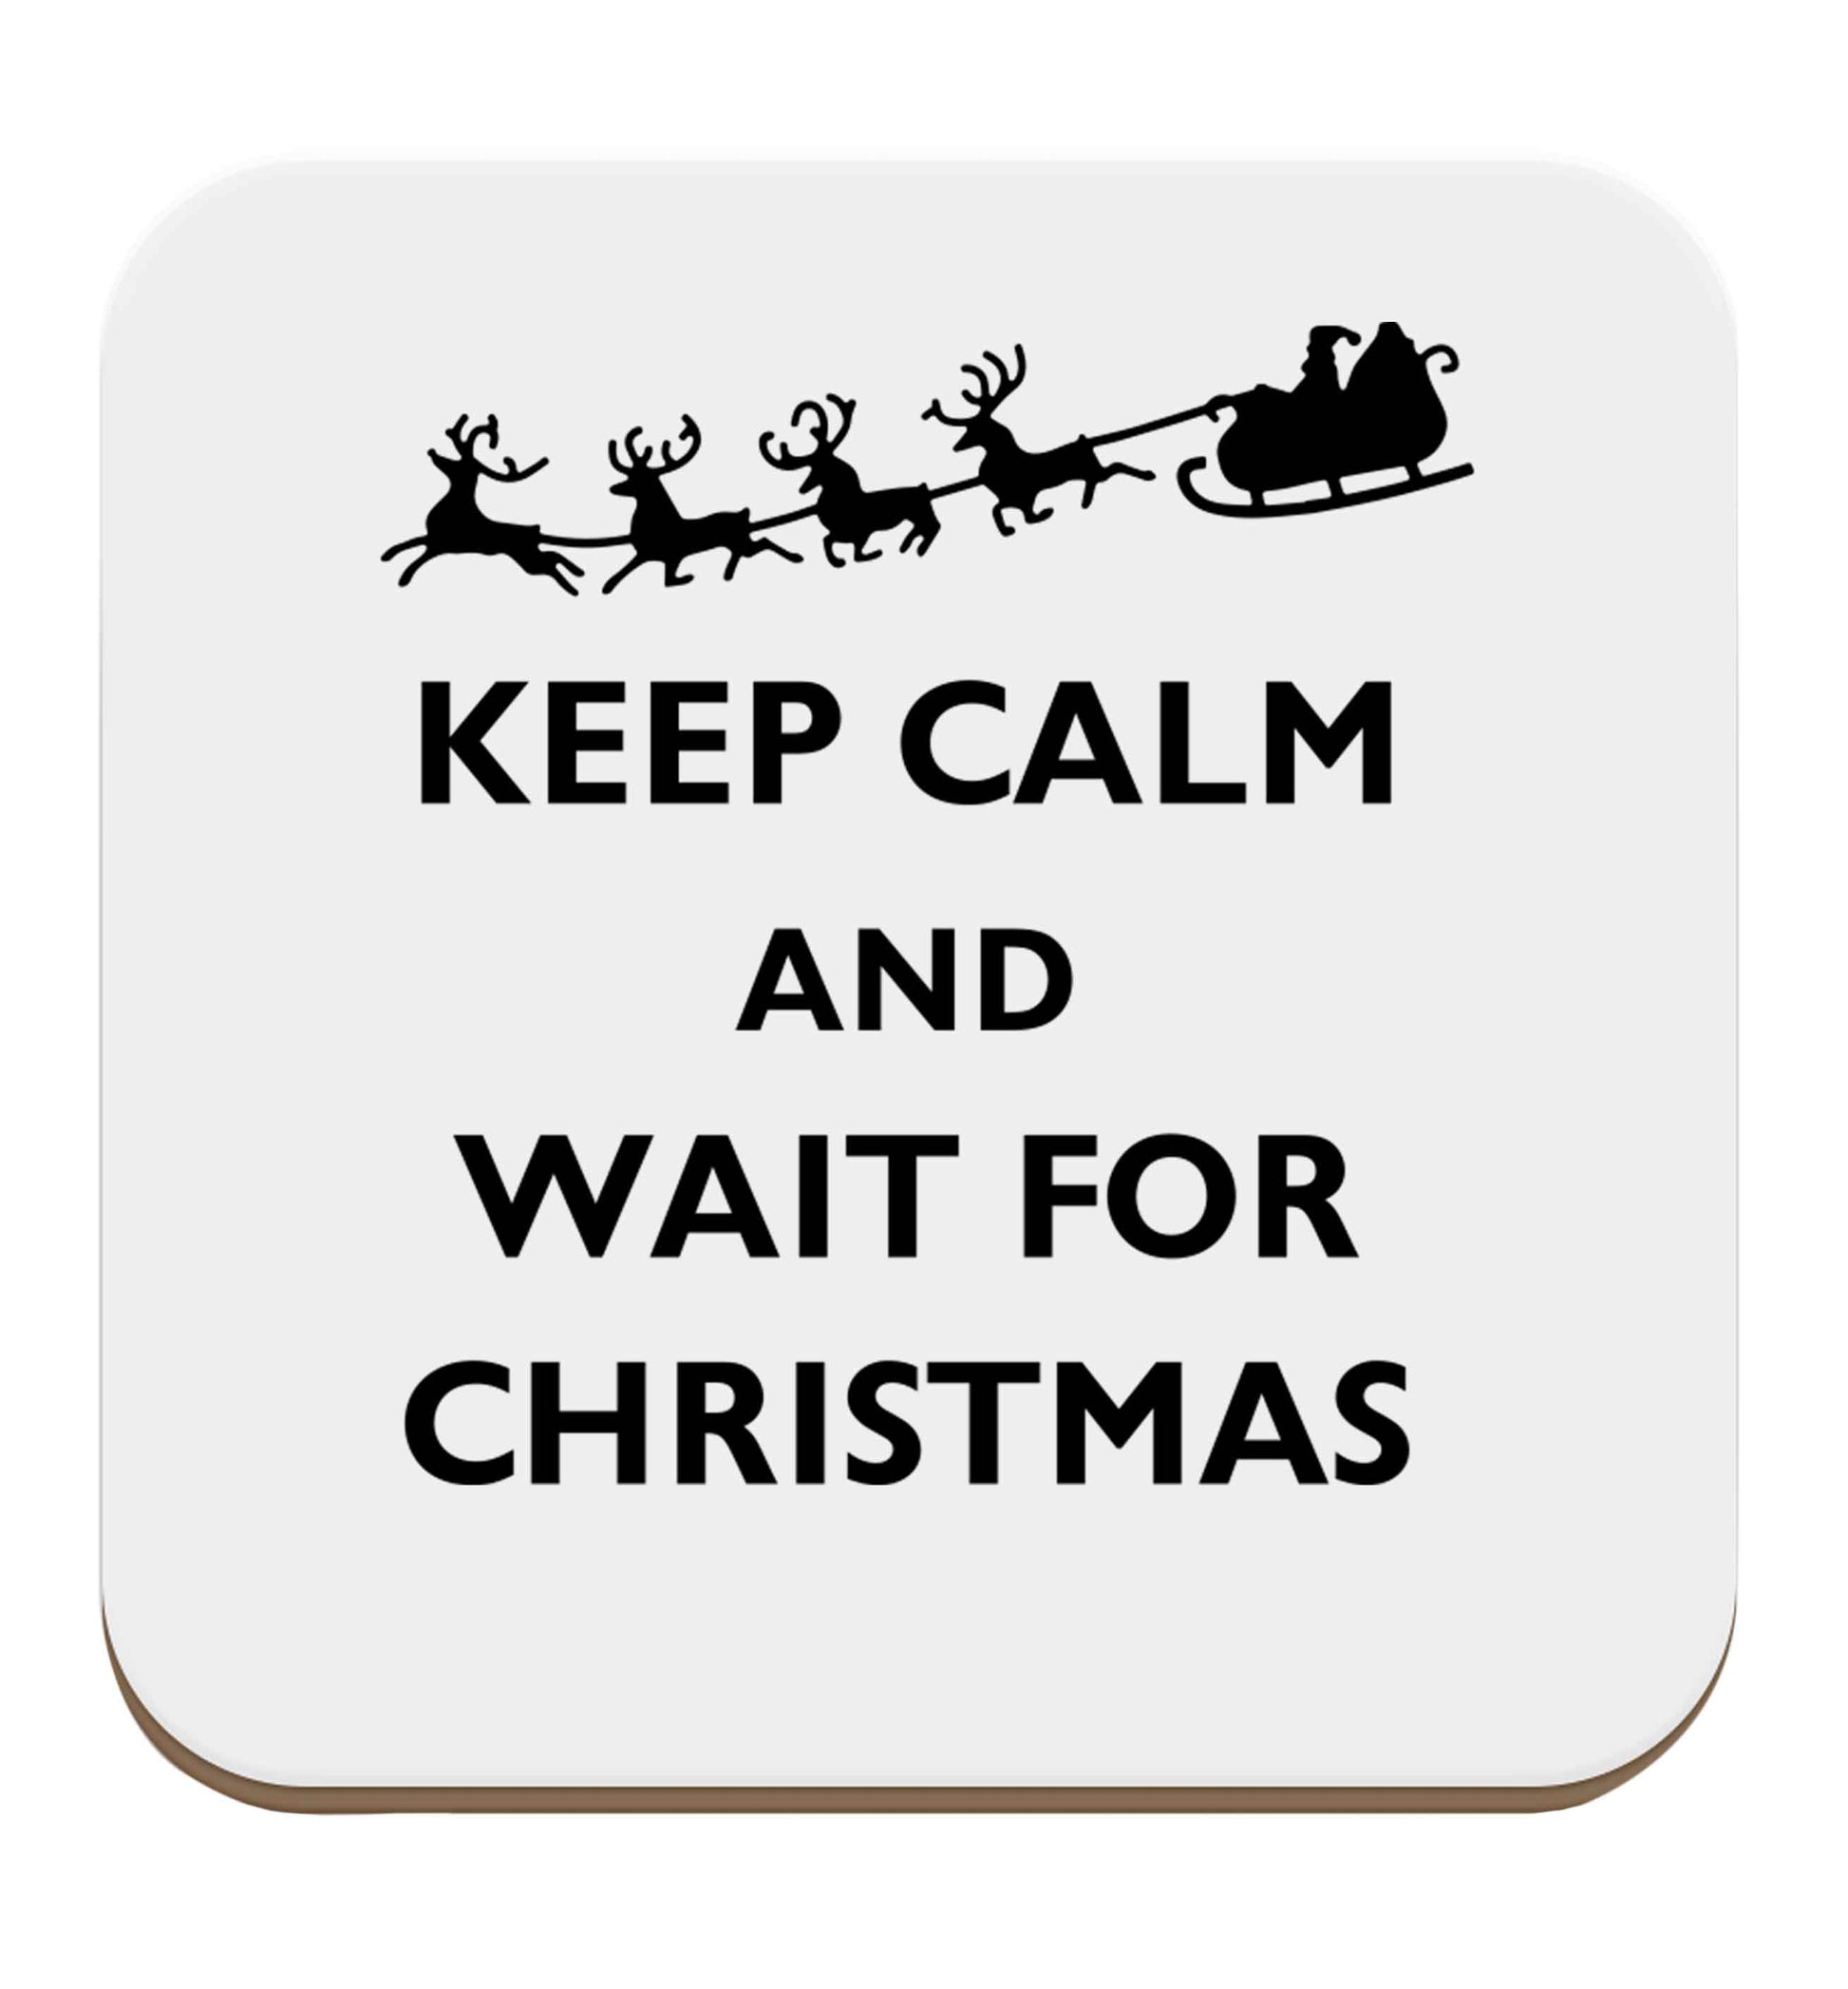 Keep calm and wait for Christmas set of four coasters